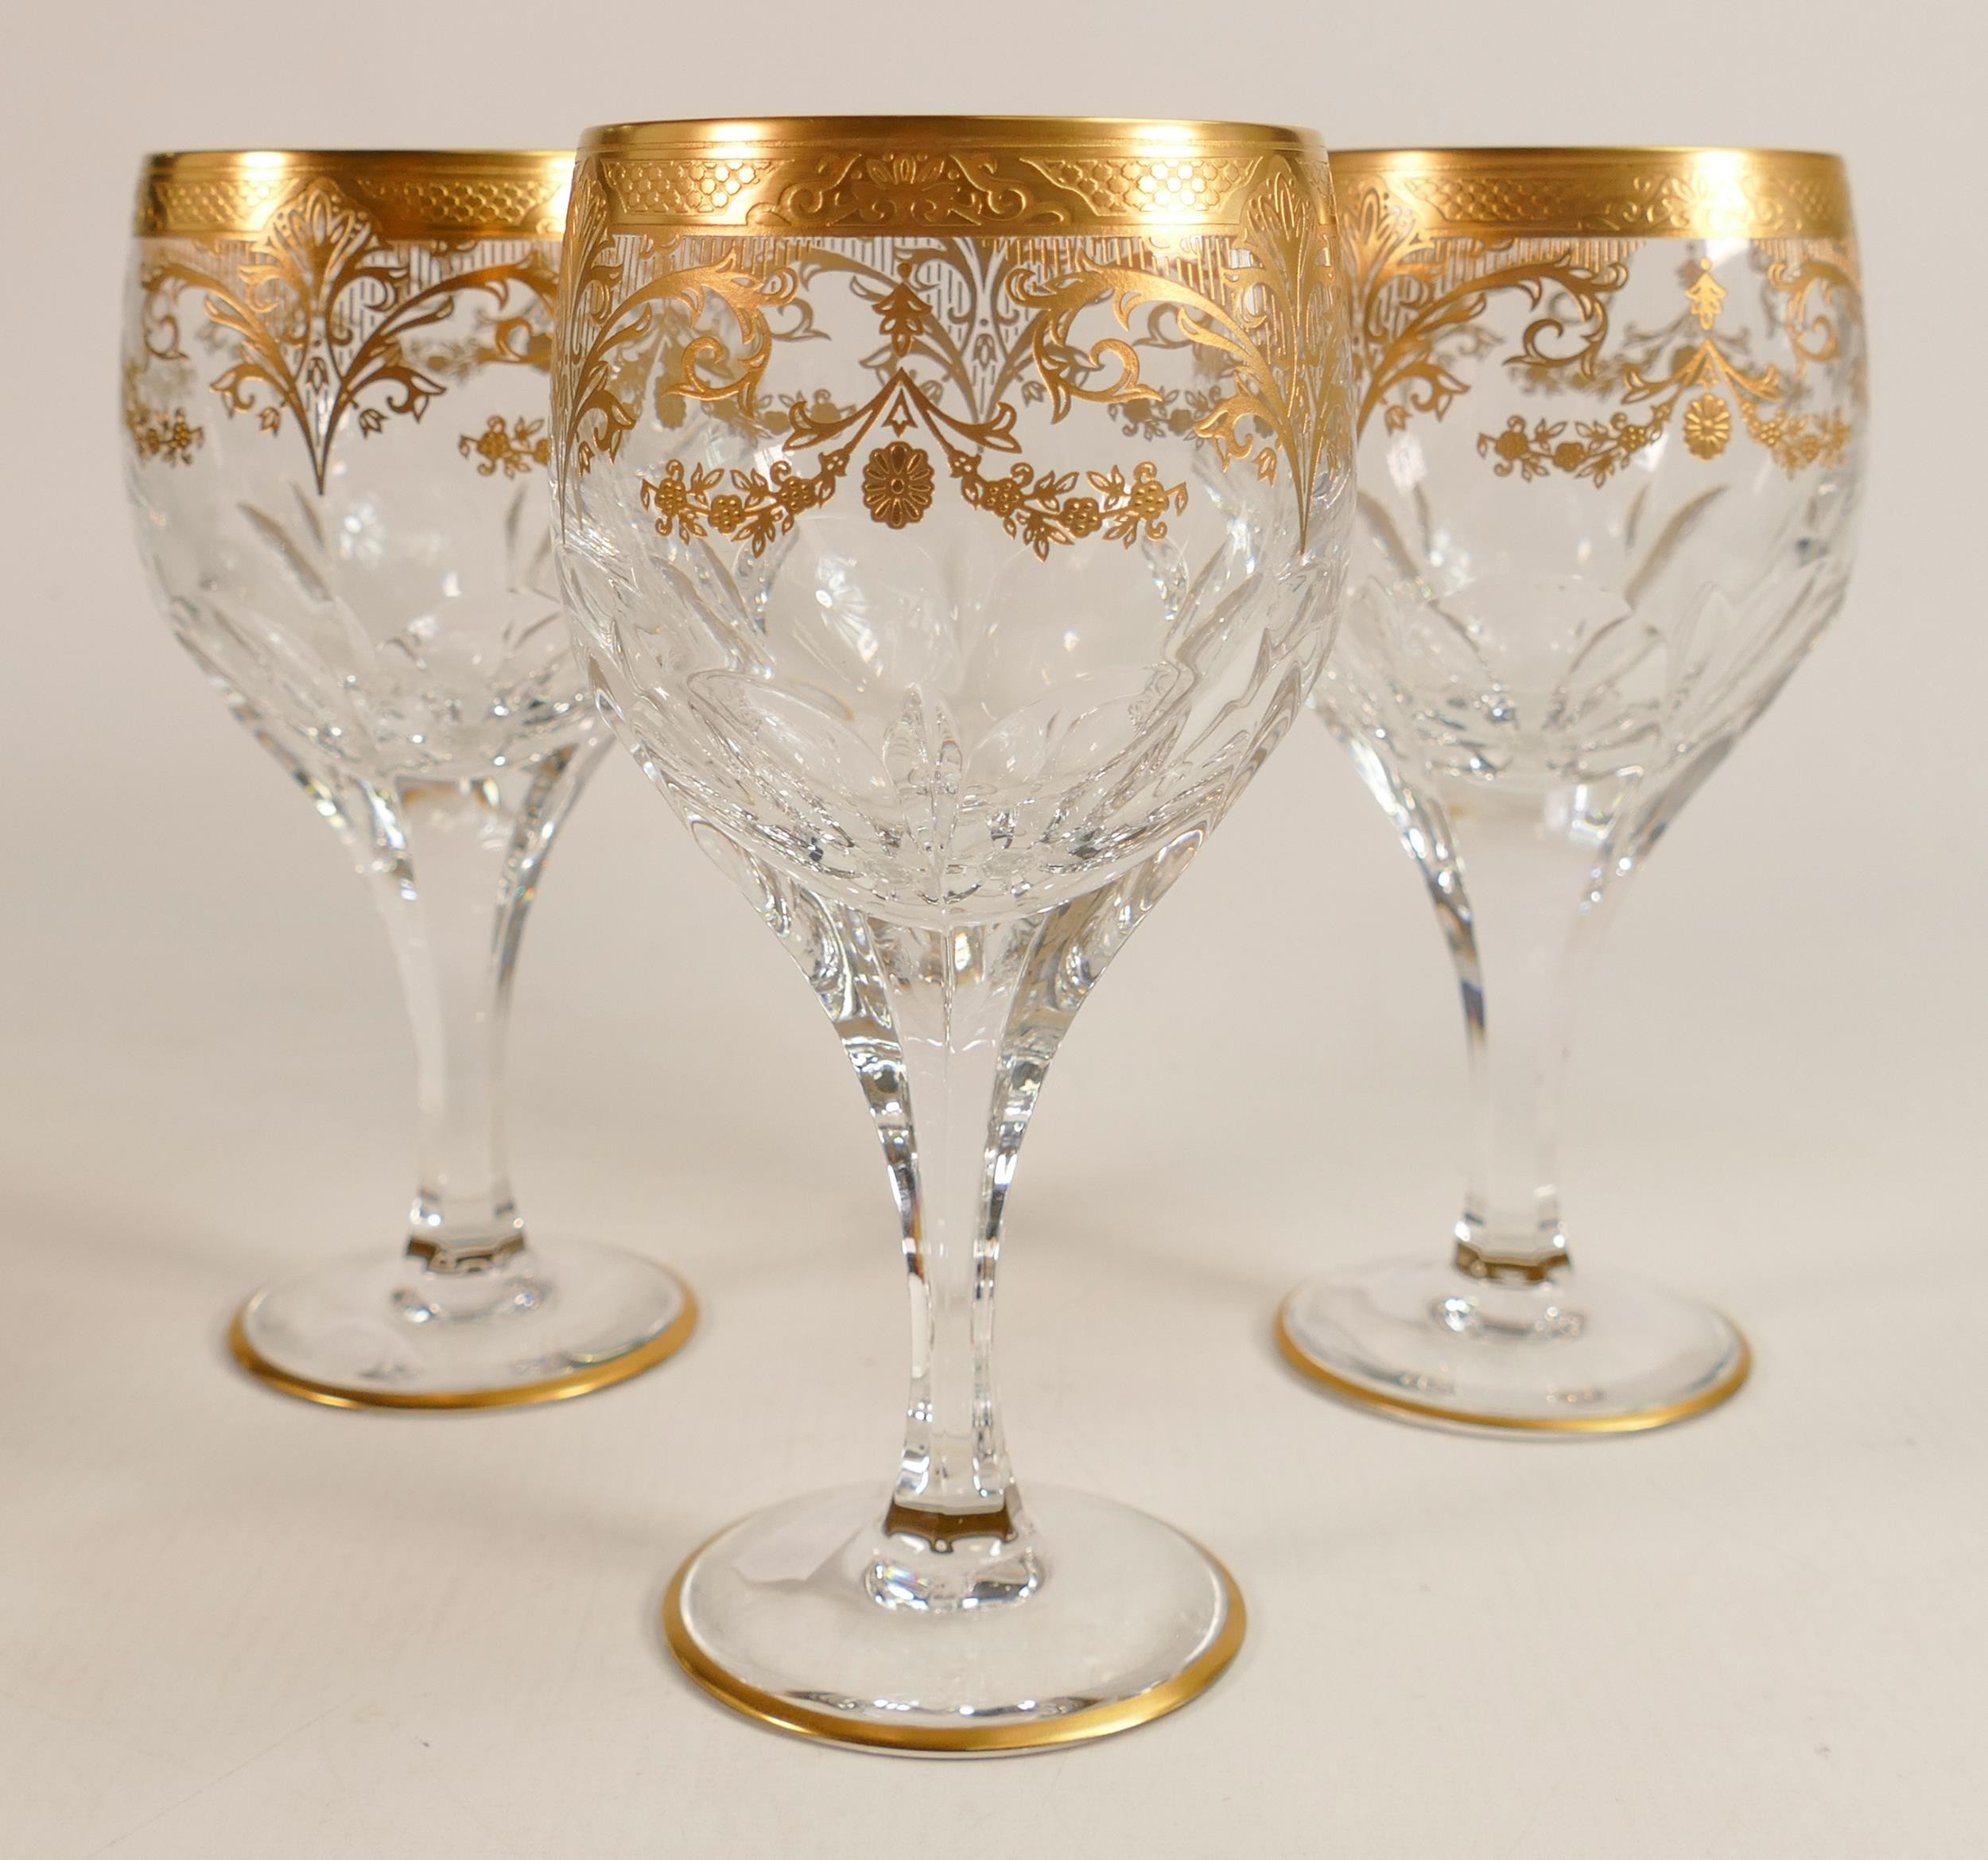 De Lamerie fine crystal heavily gilded glass goblets, specially made high end quality items,